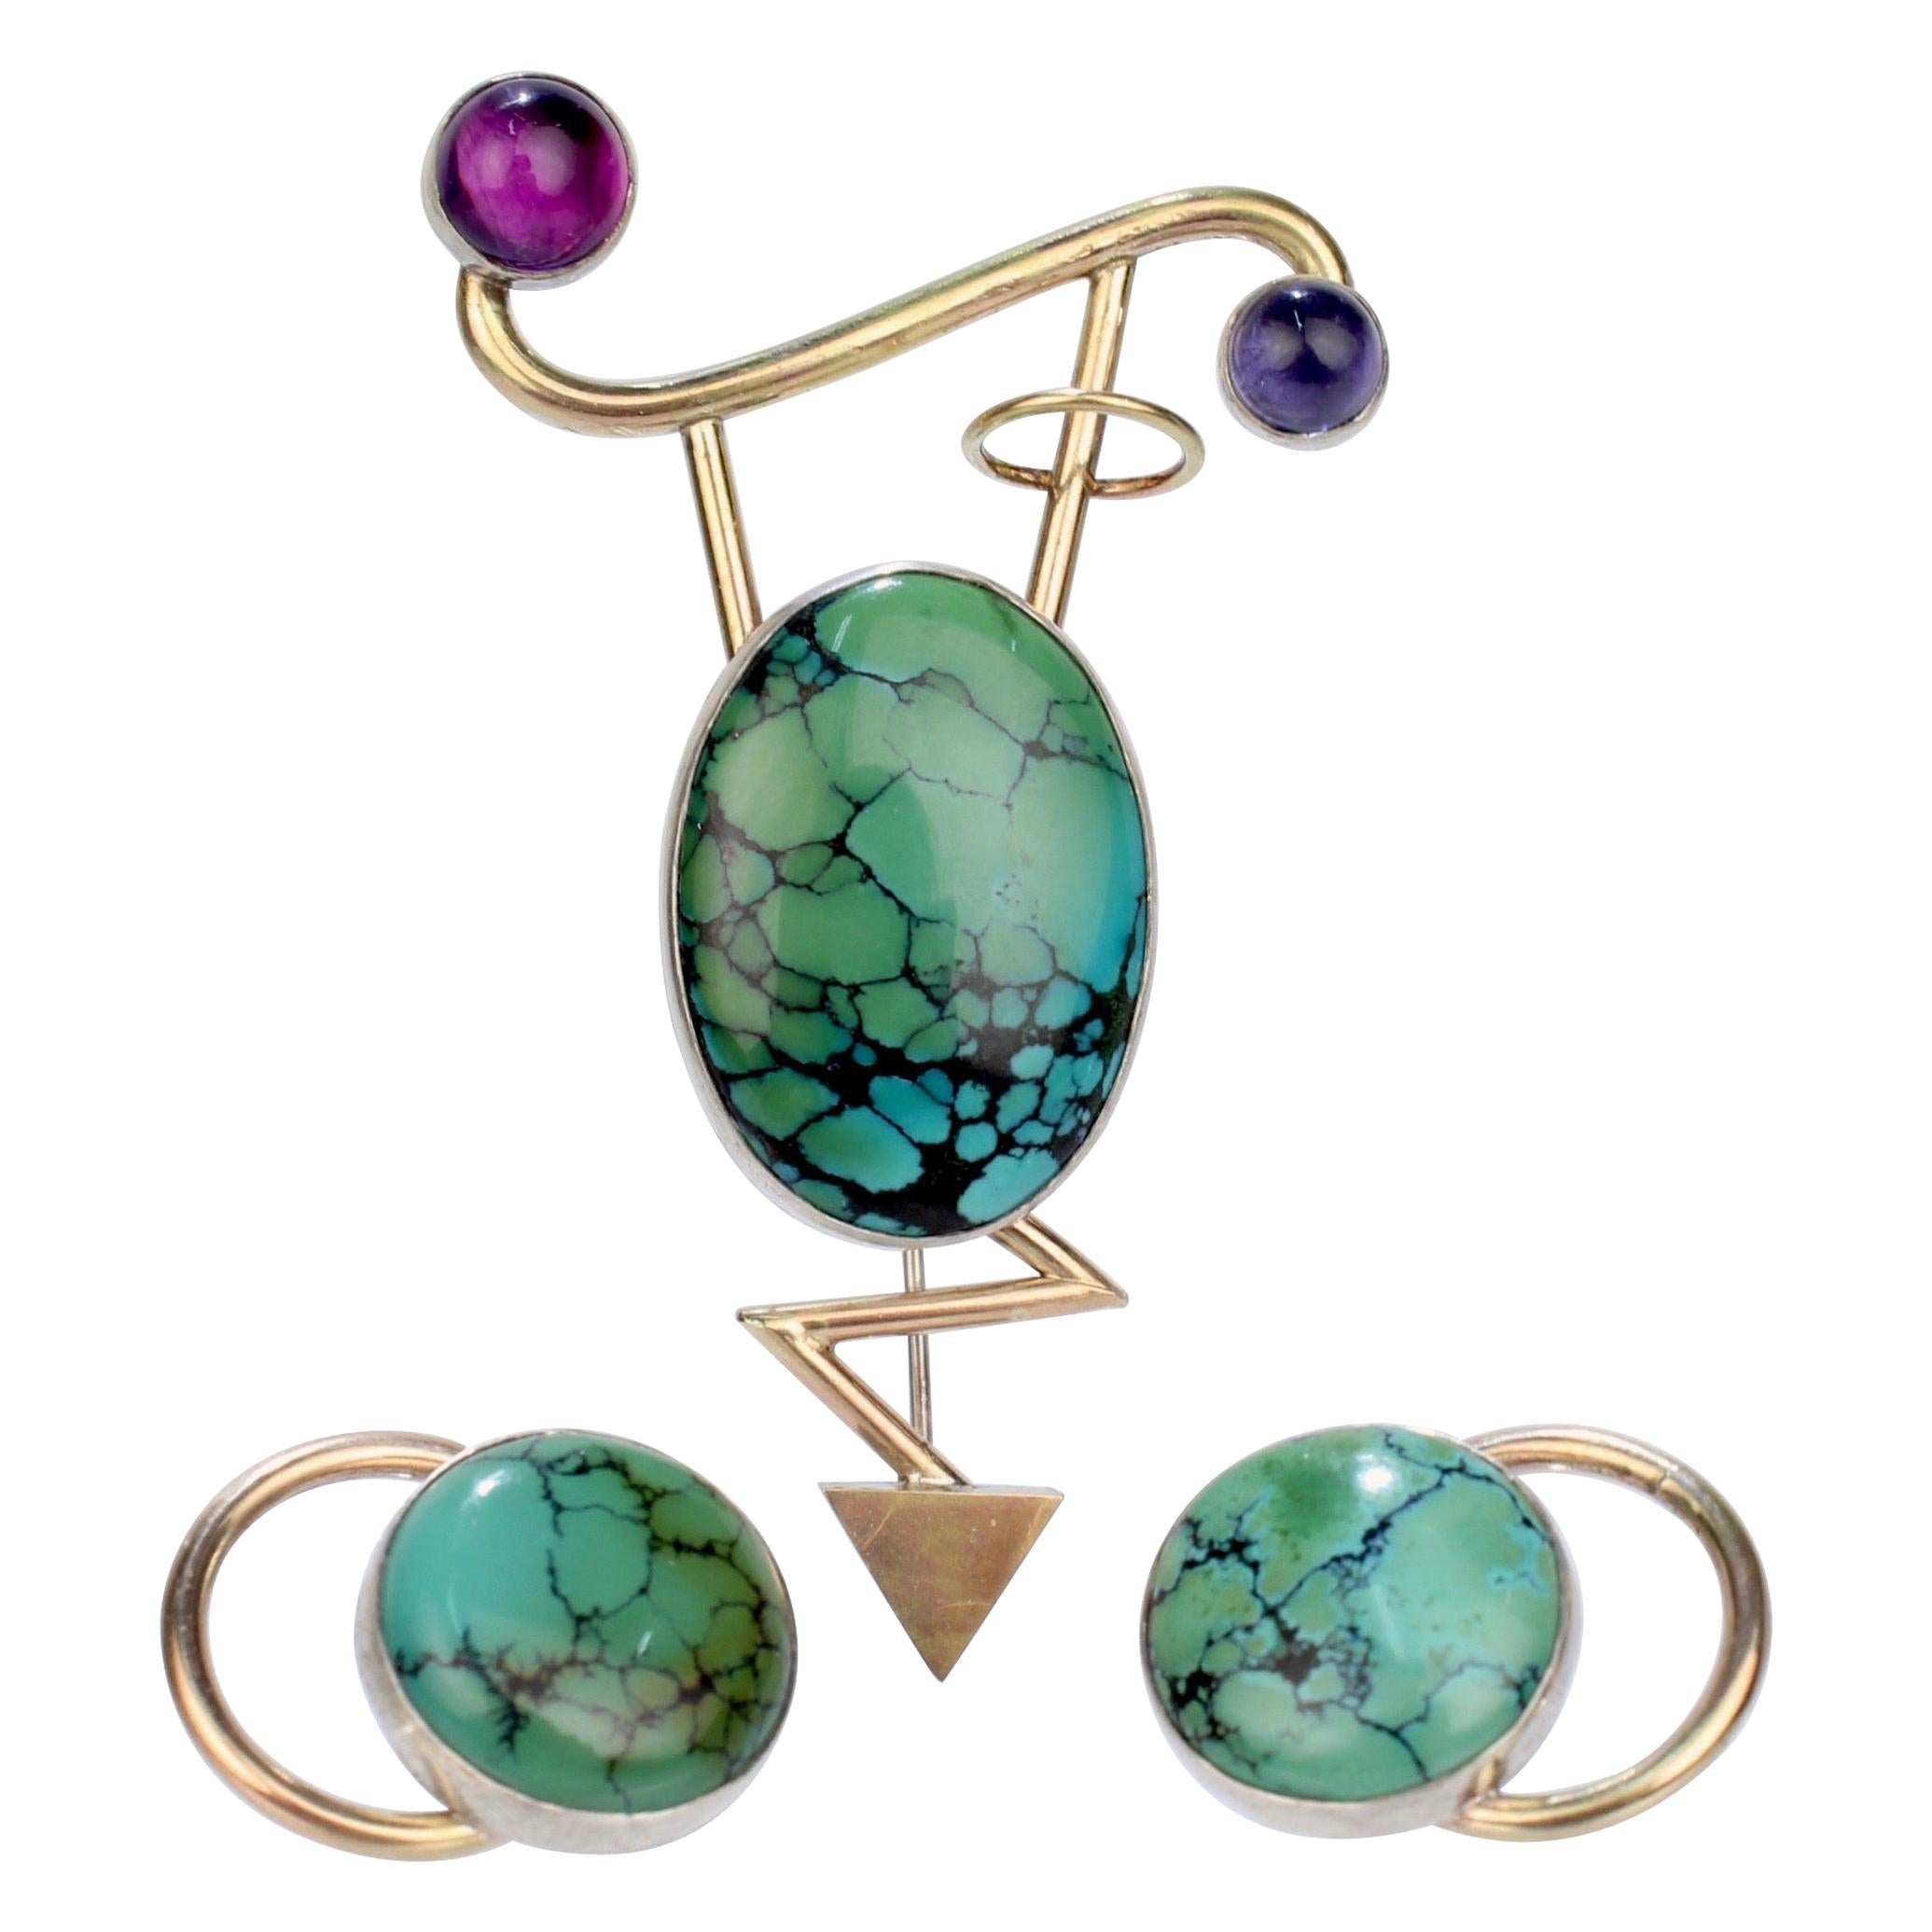 Yumi Ueno Silver & Gold Earrings & Brooch Set with Matrix Turquoise & Gemstones